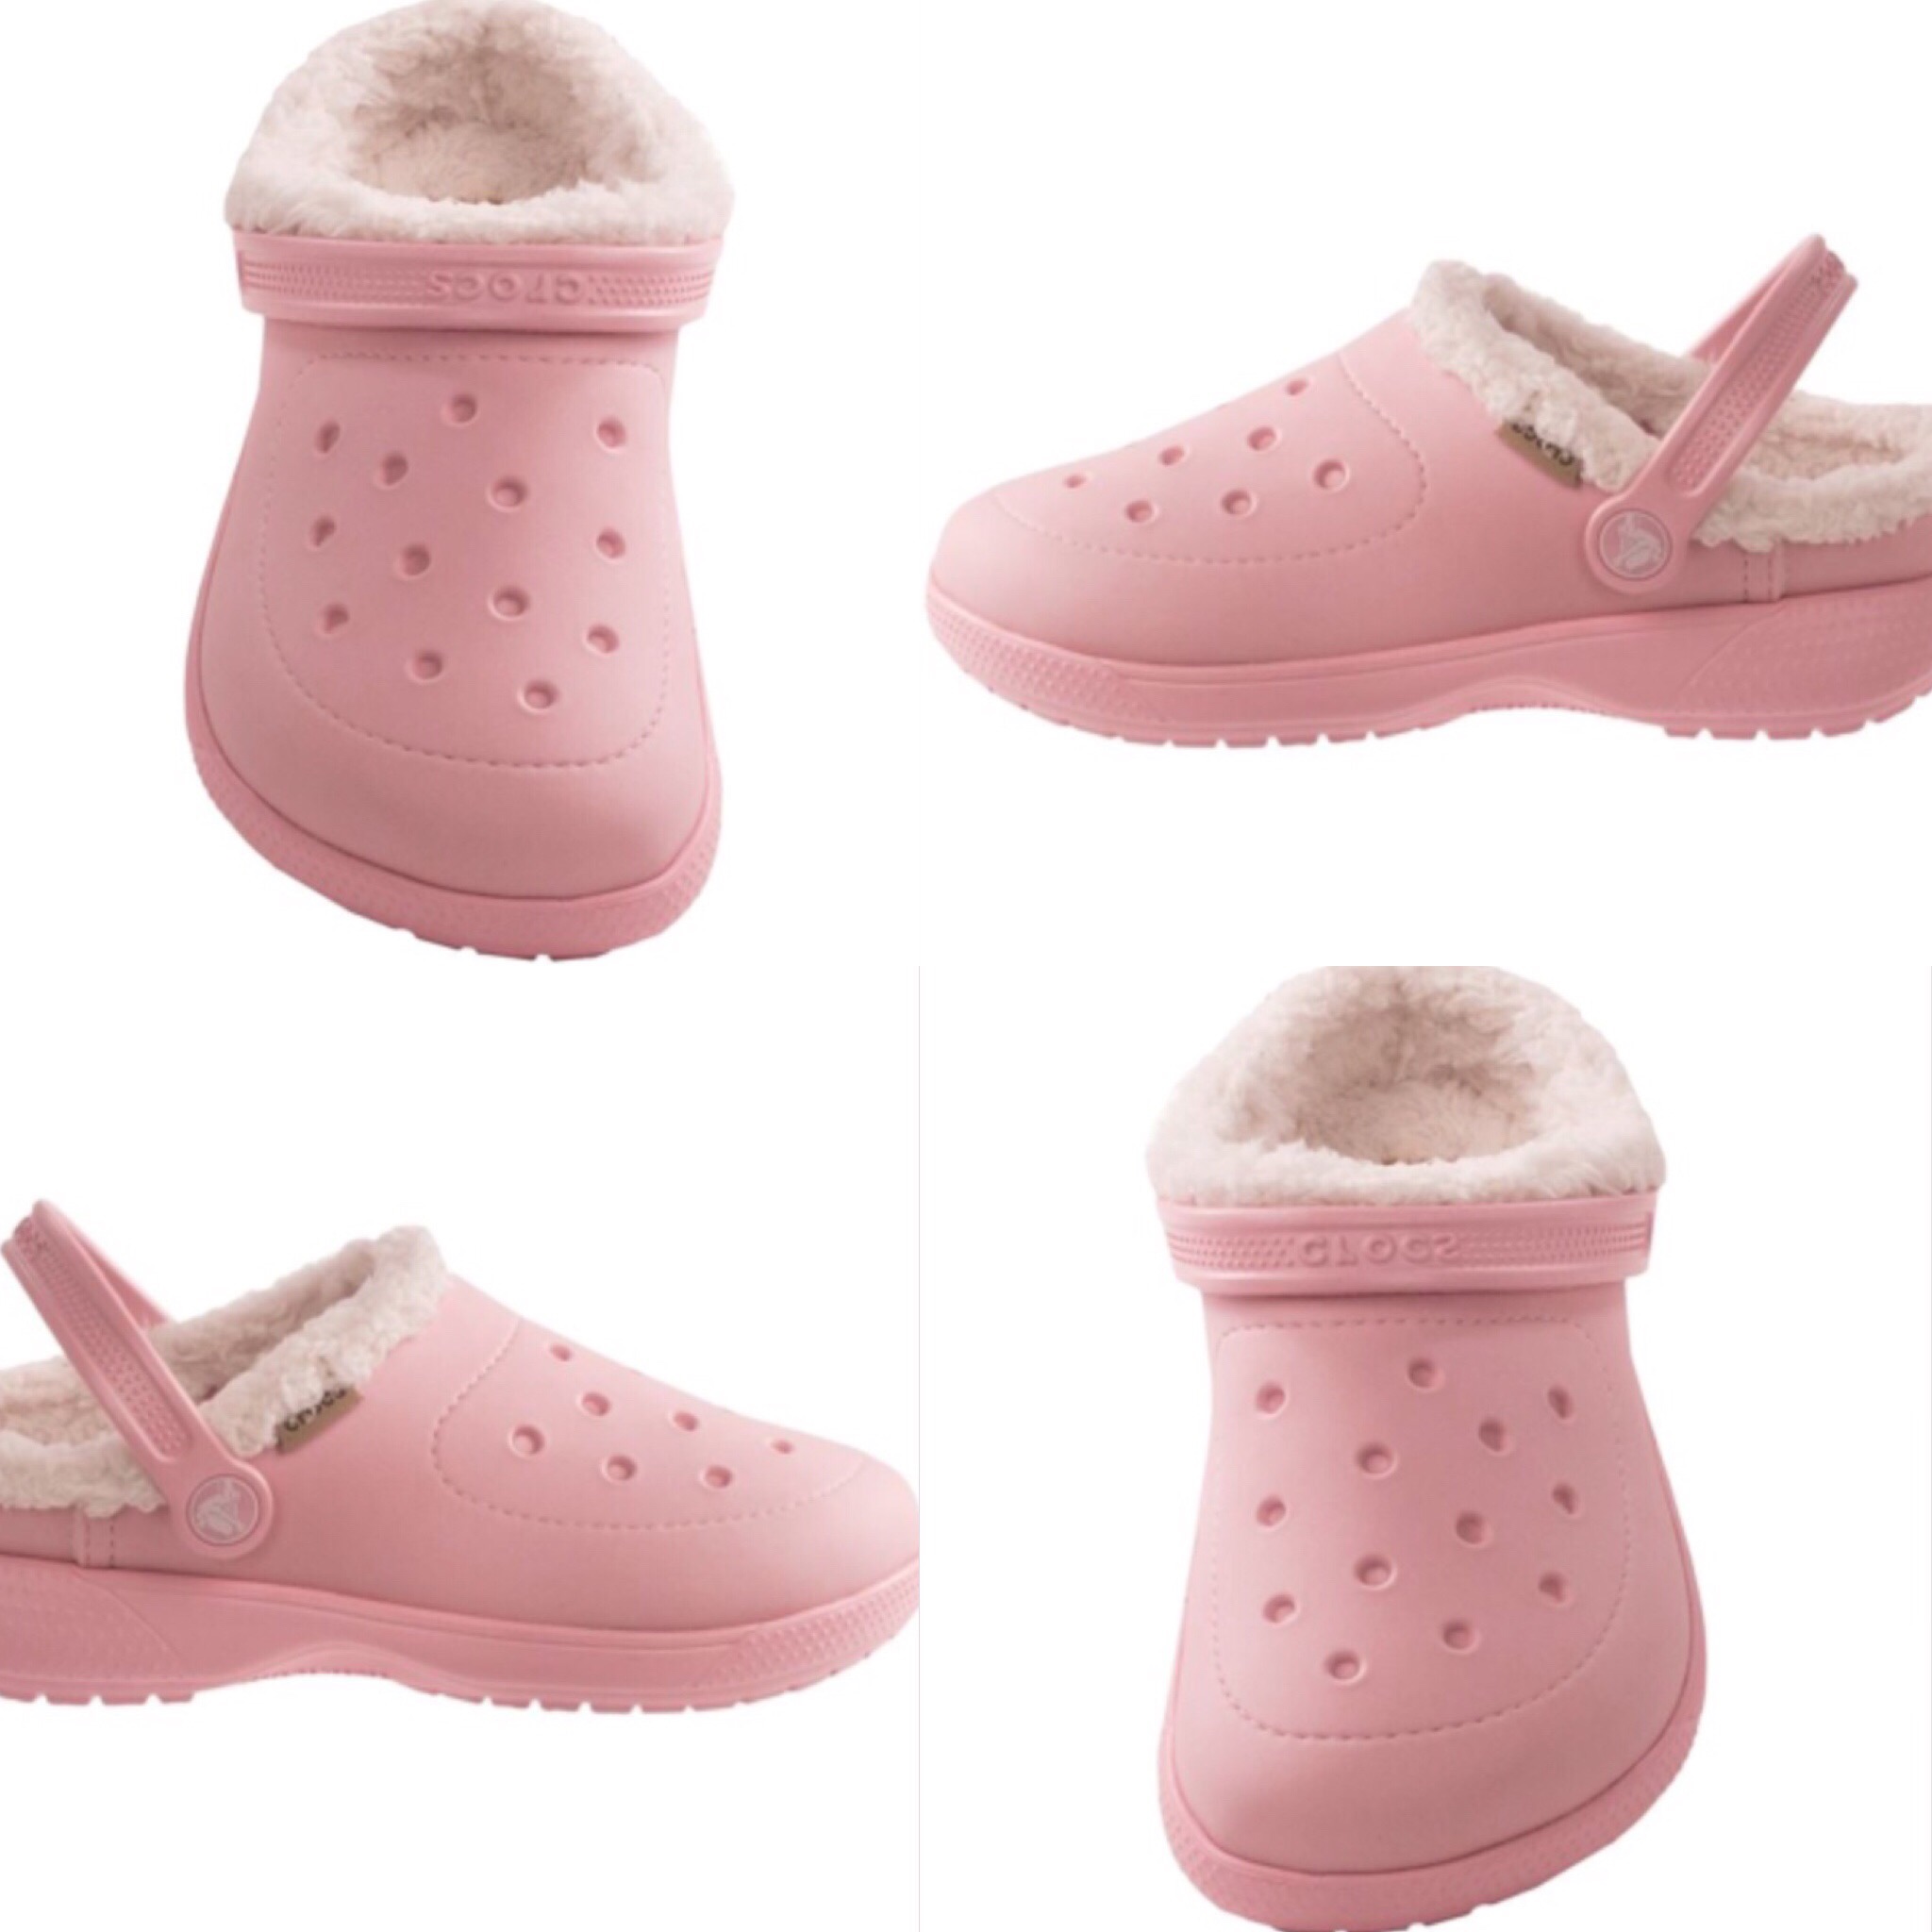 can i put my fuzzy crocs in the washing machine